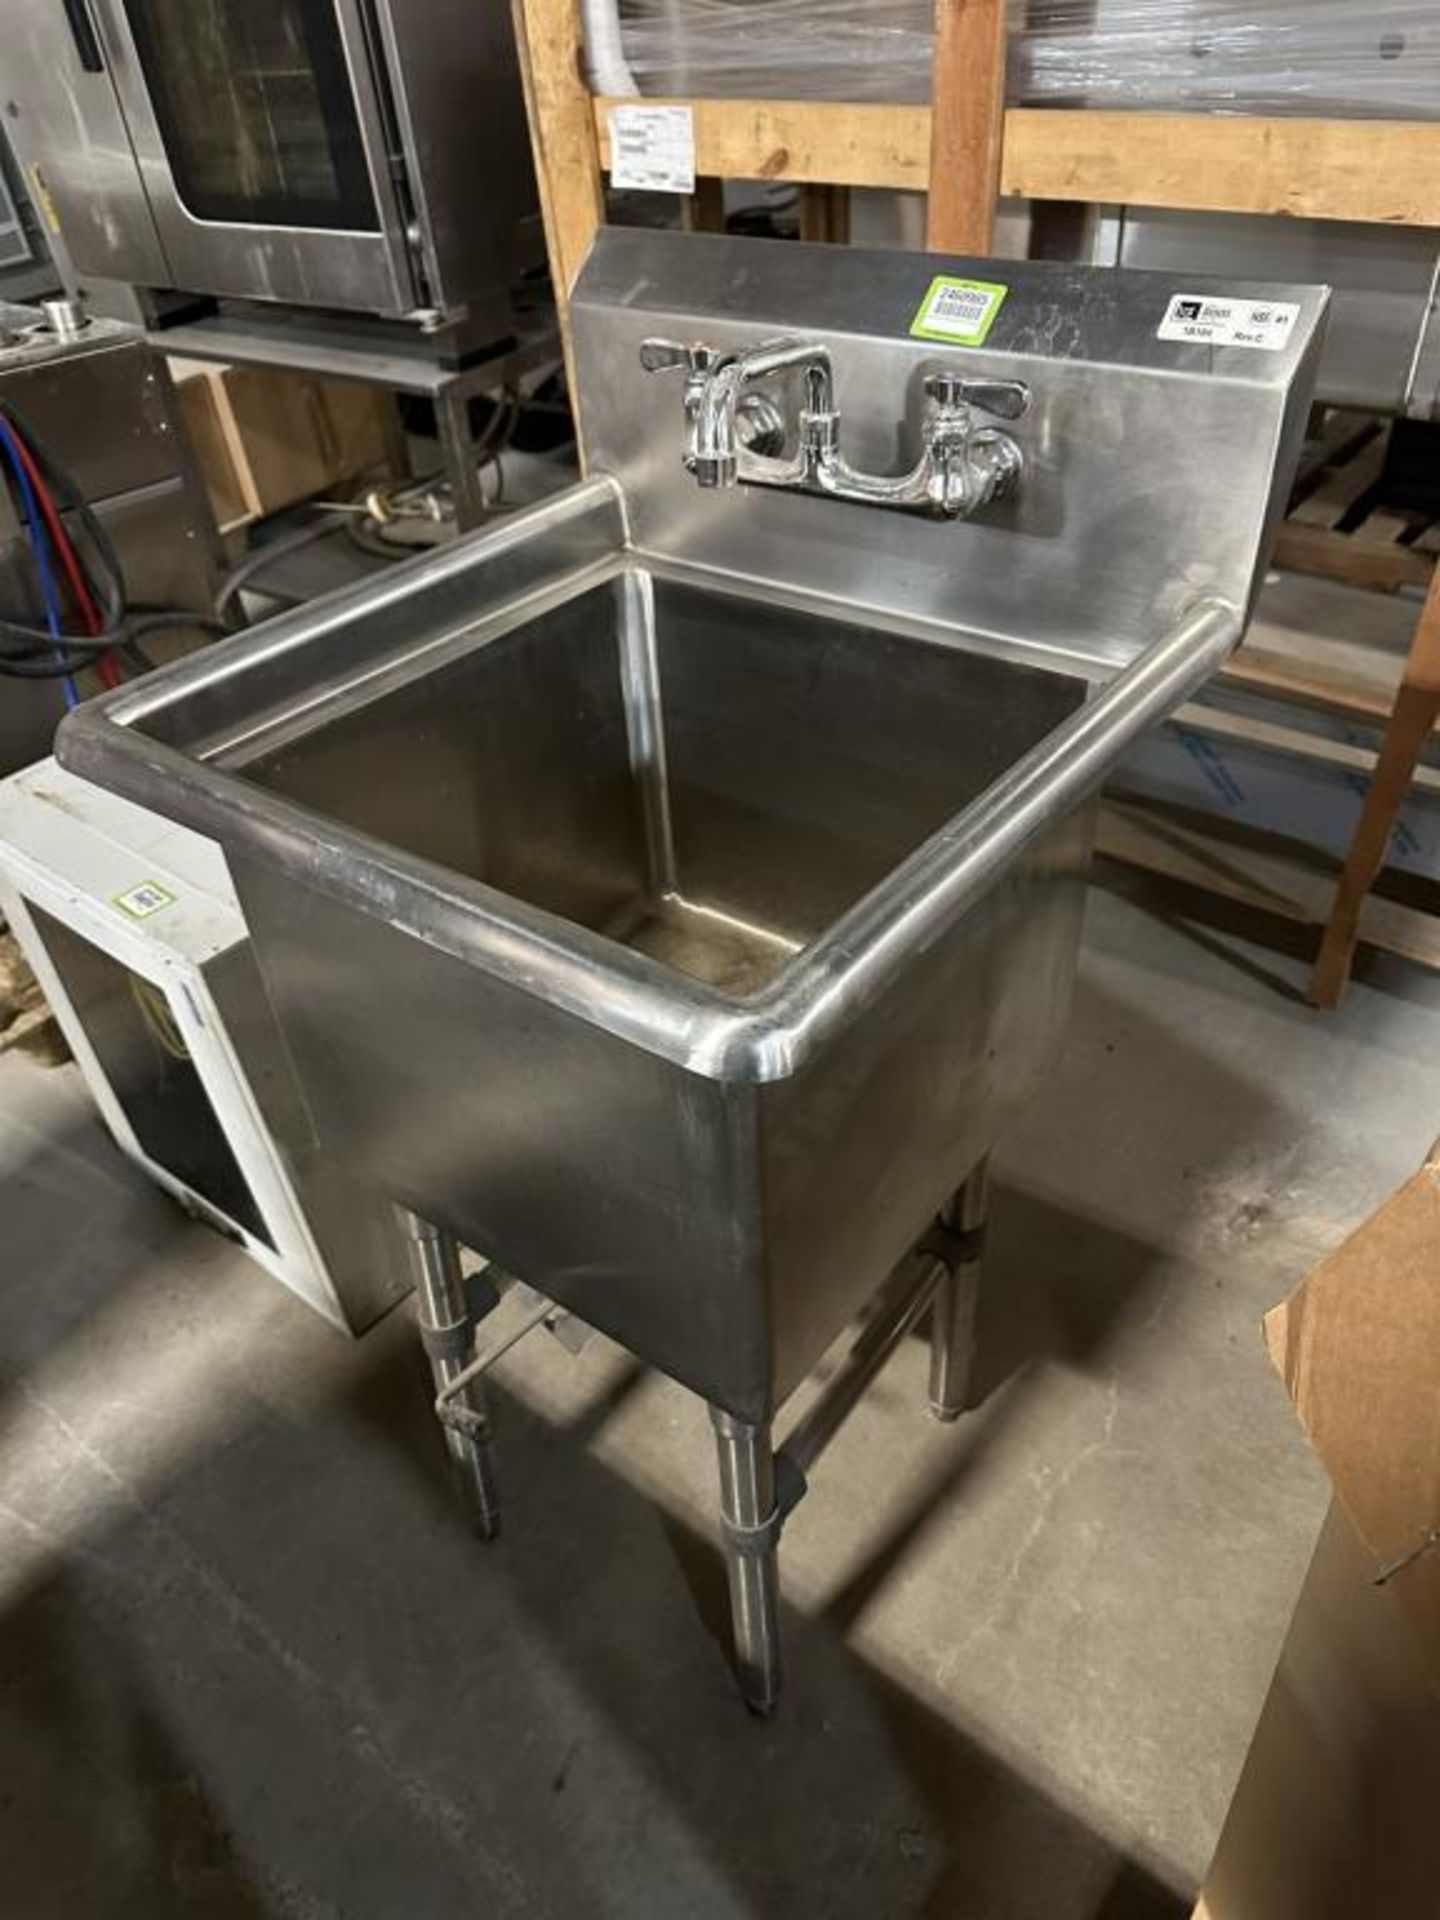 Stainless Steel Sink - Image 2 of 4